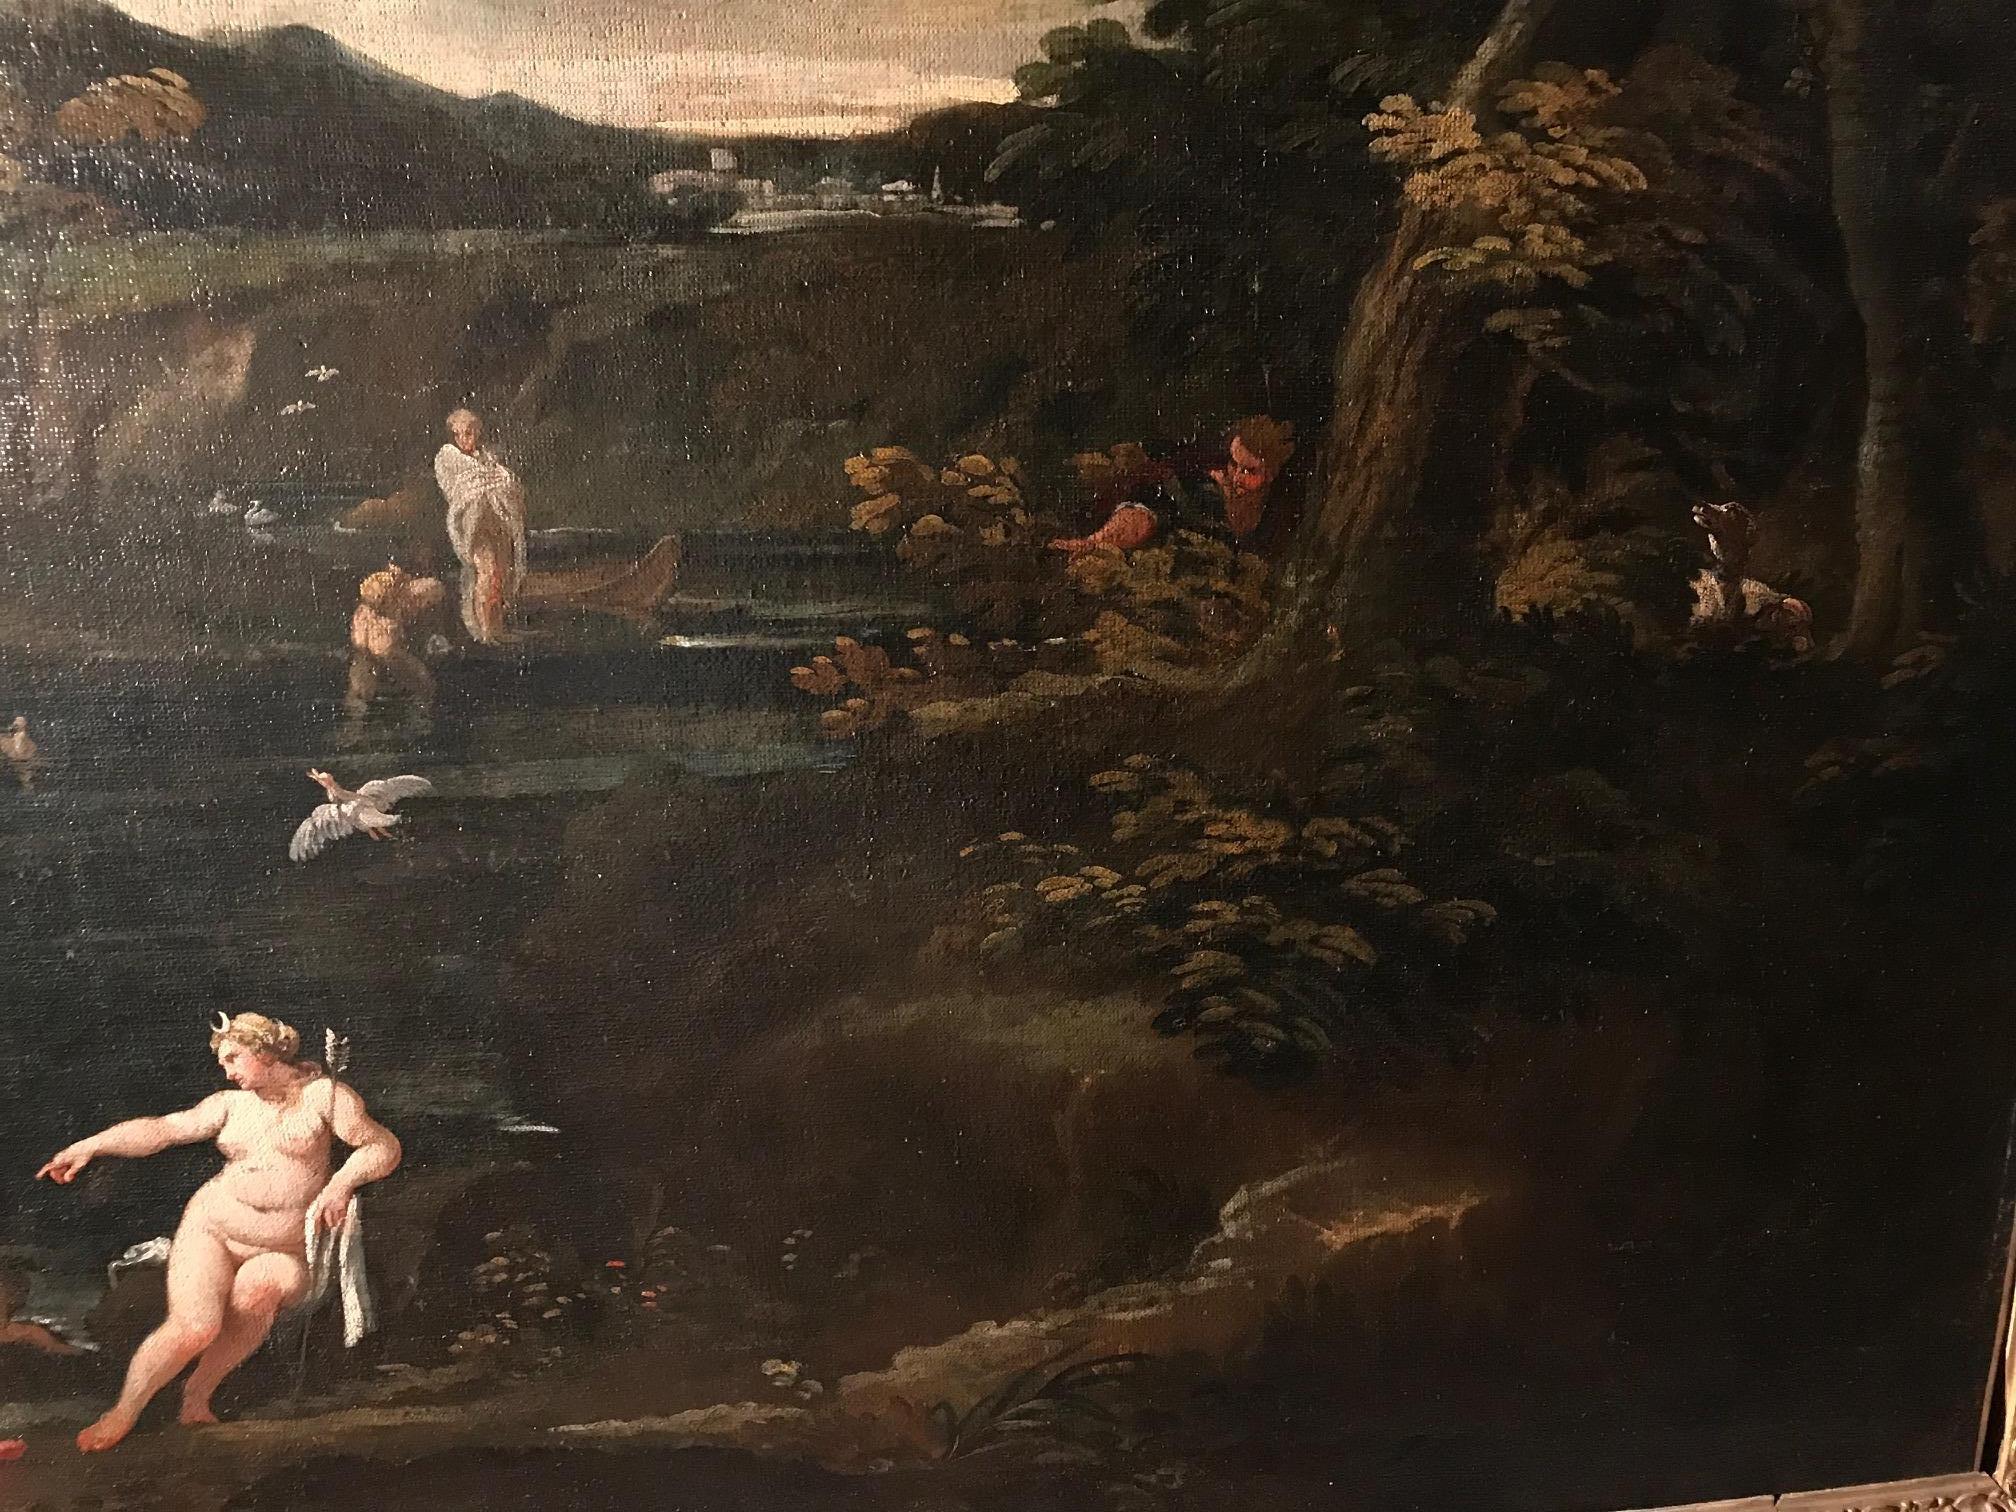 actaeon and diana story